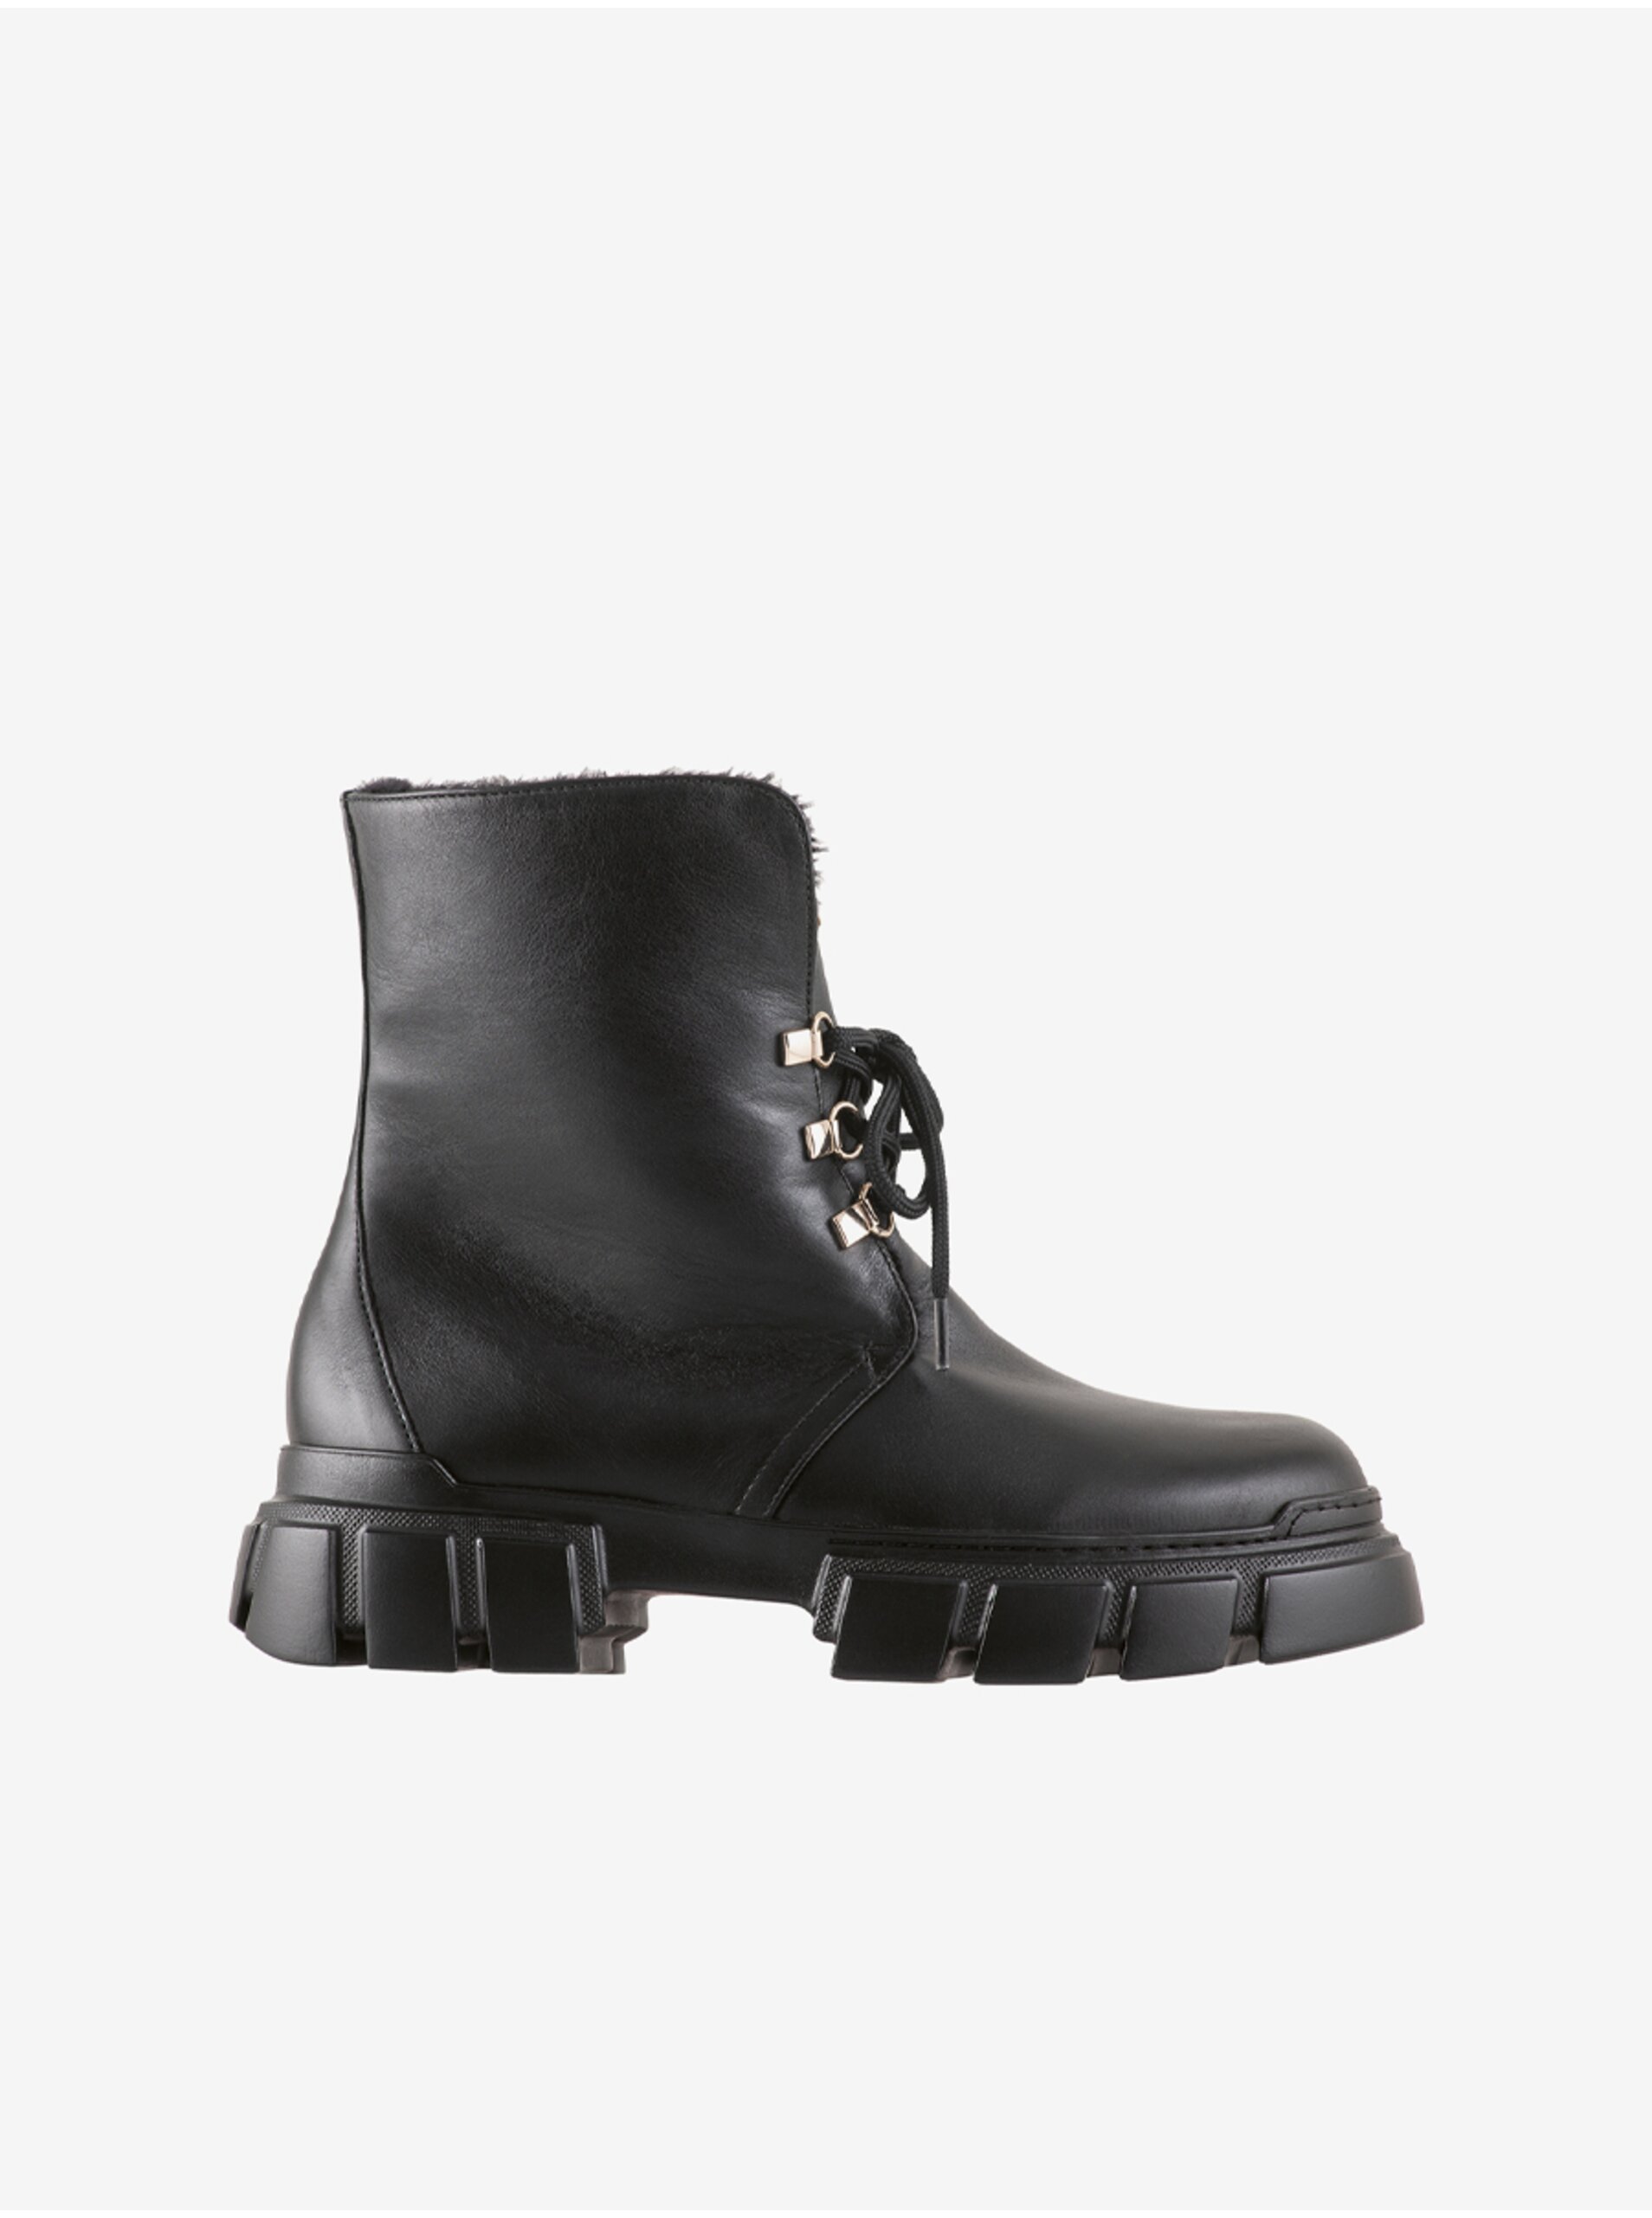 Black Women's Leather Ankle Boots Högl Winter hike - Women